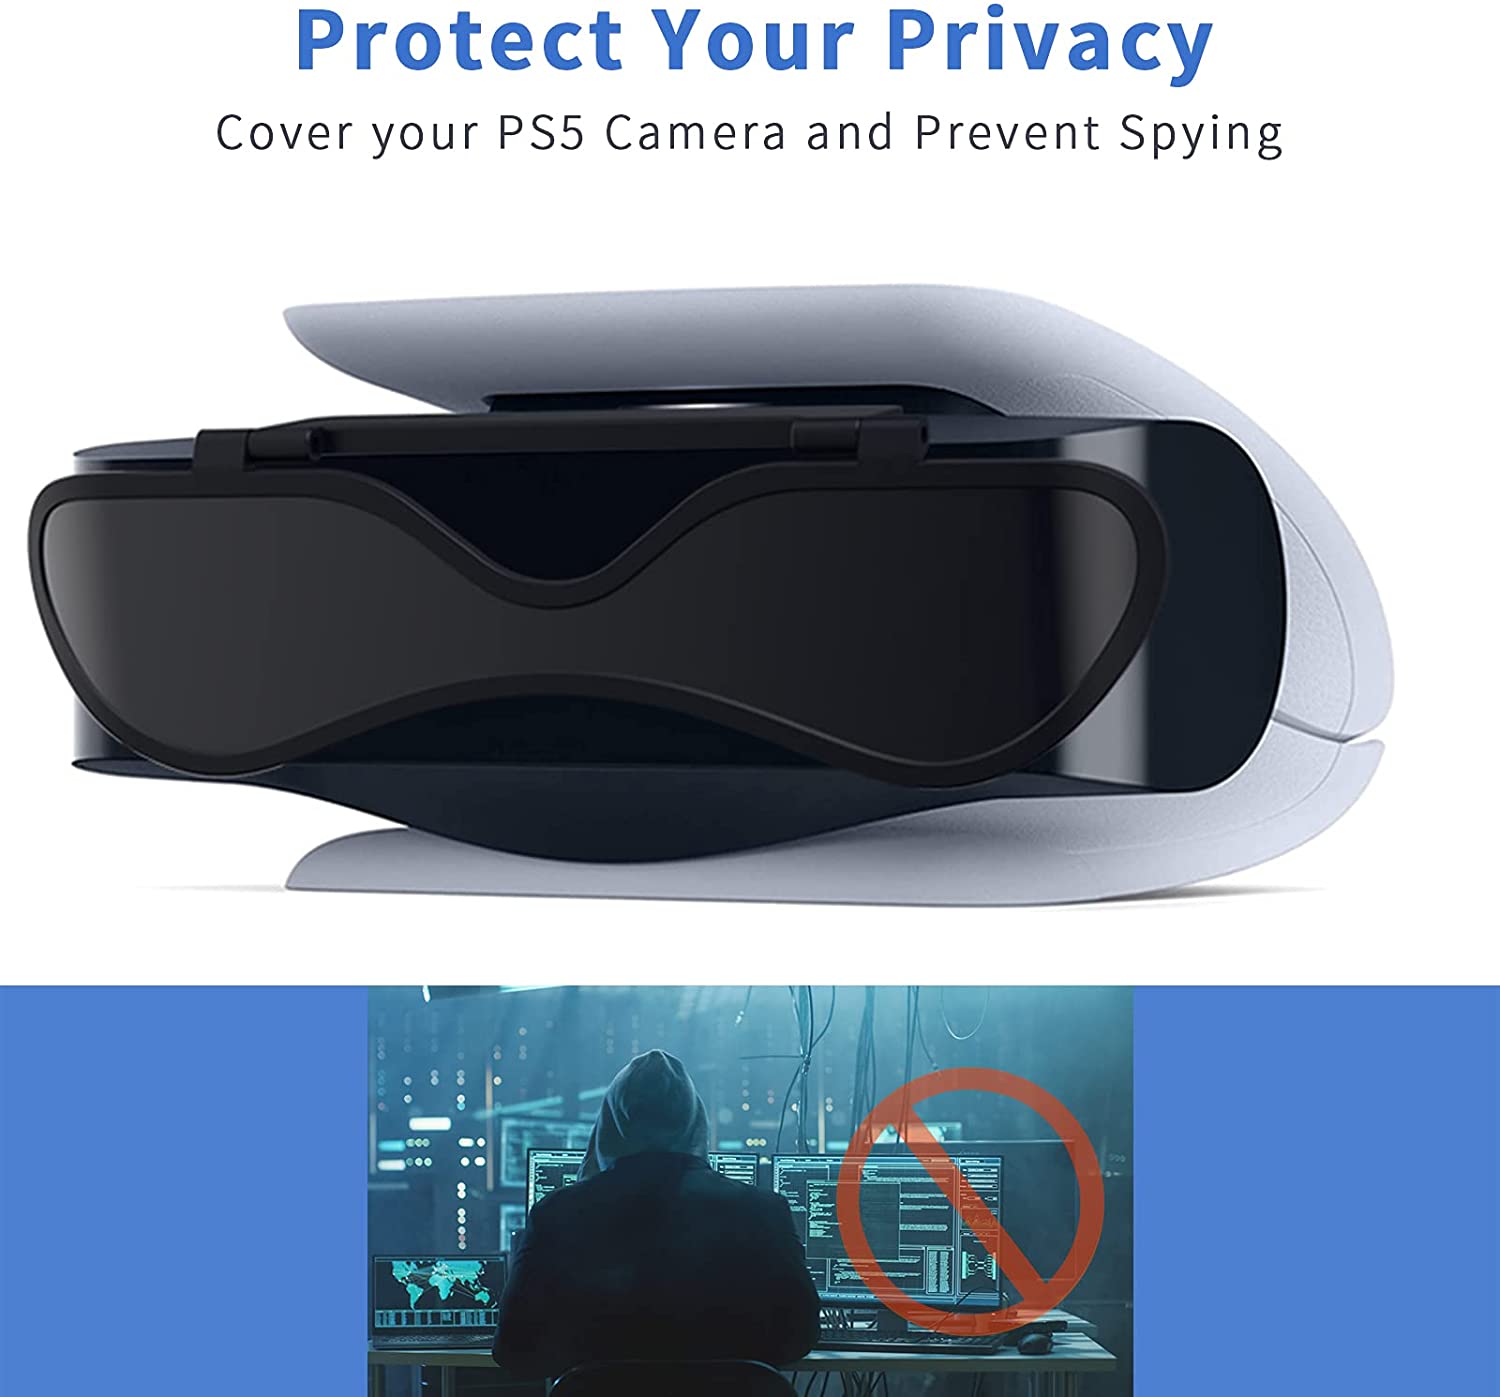 The PS5 camera protective cover can protect your privacy and ensure your security.